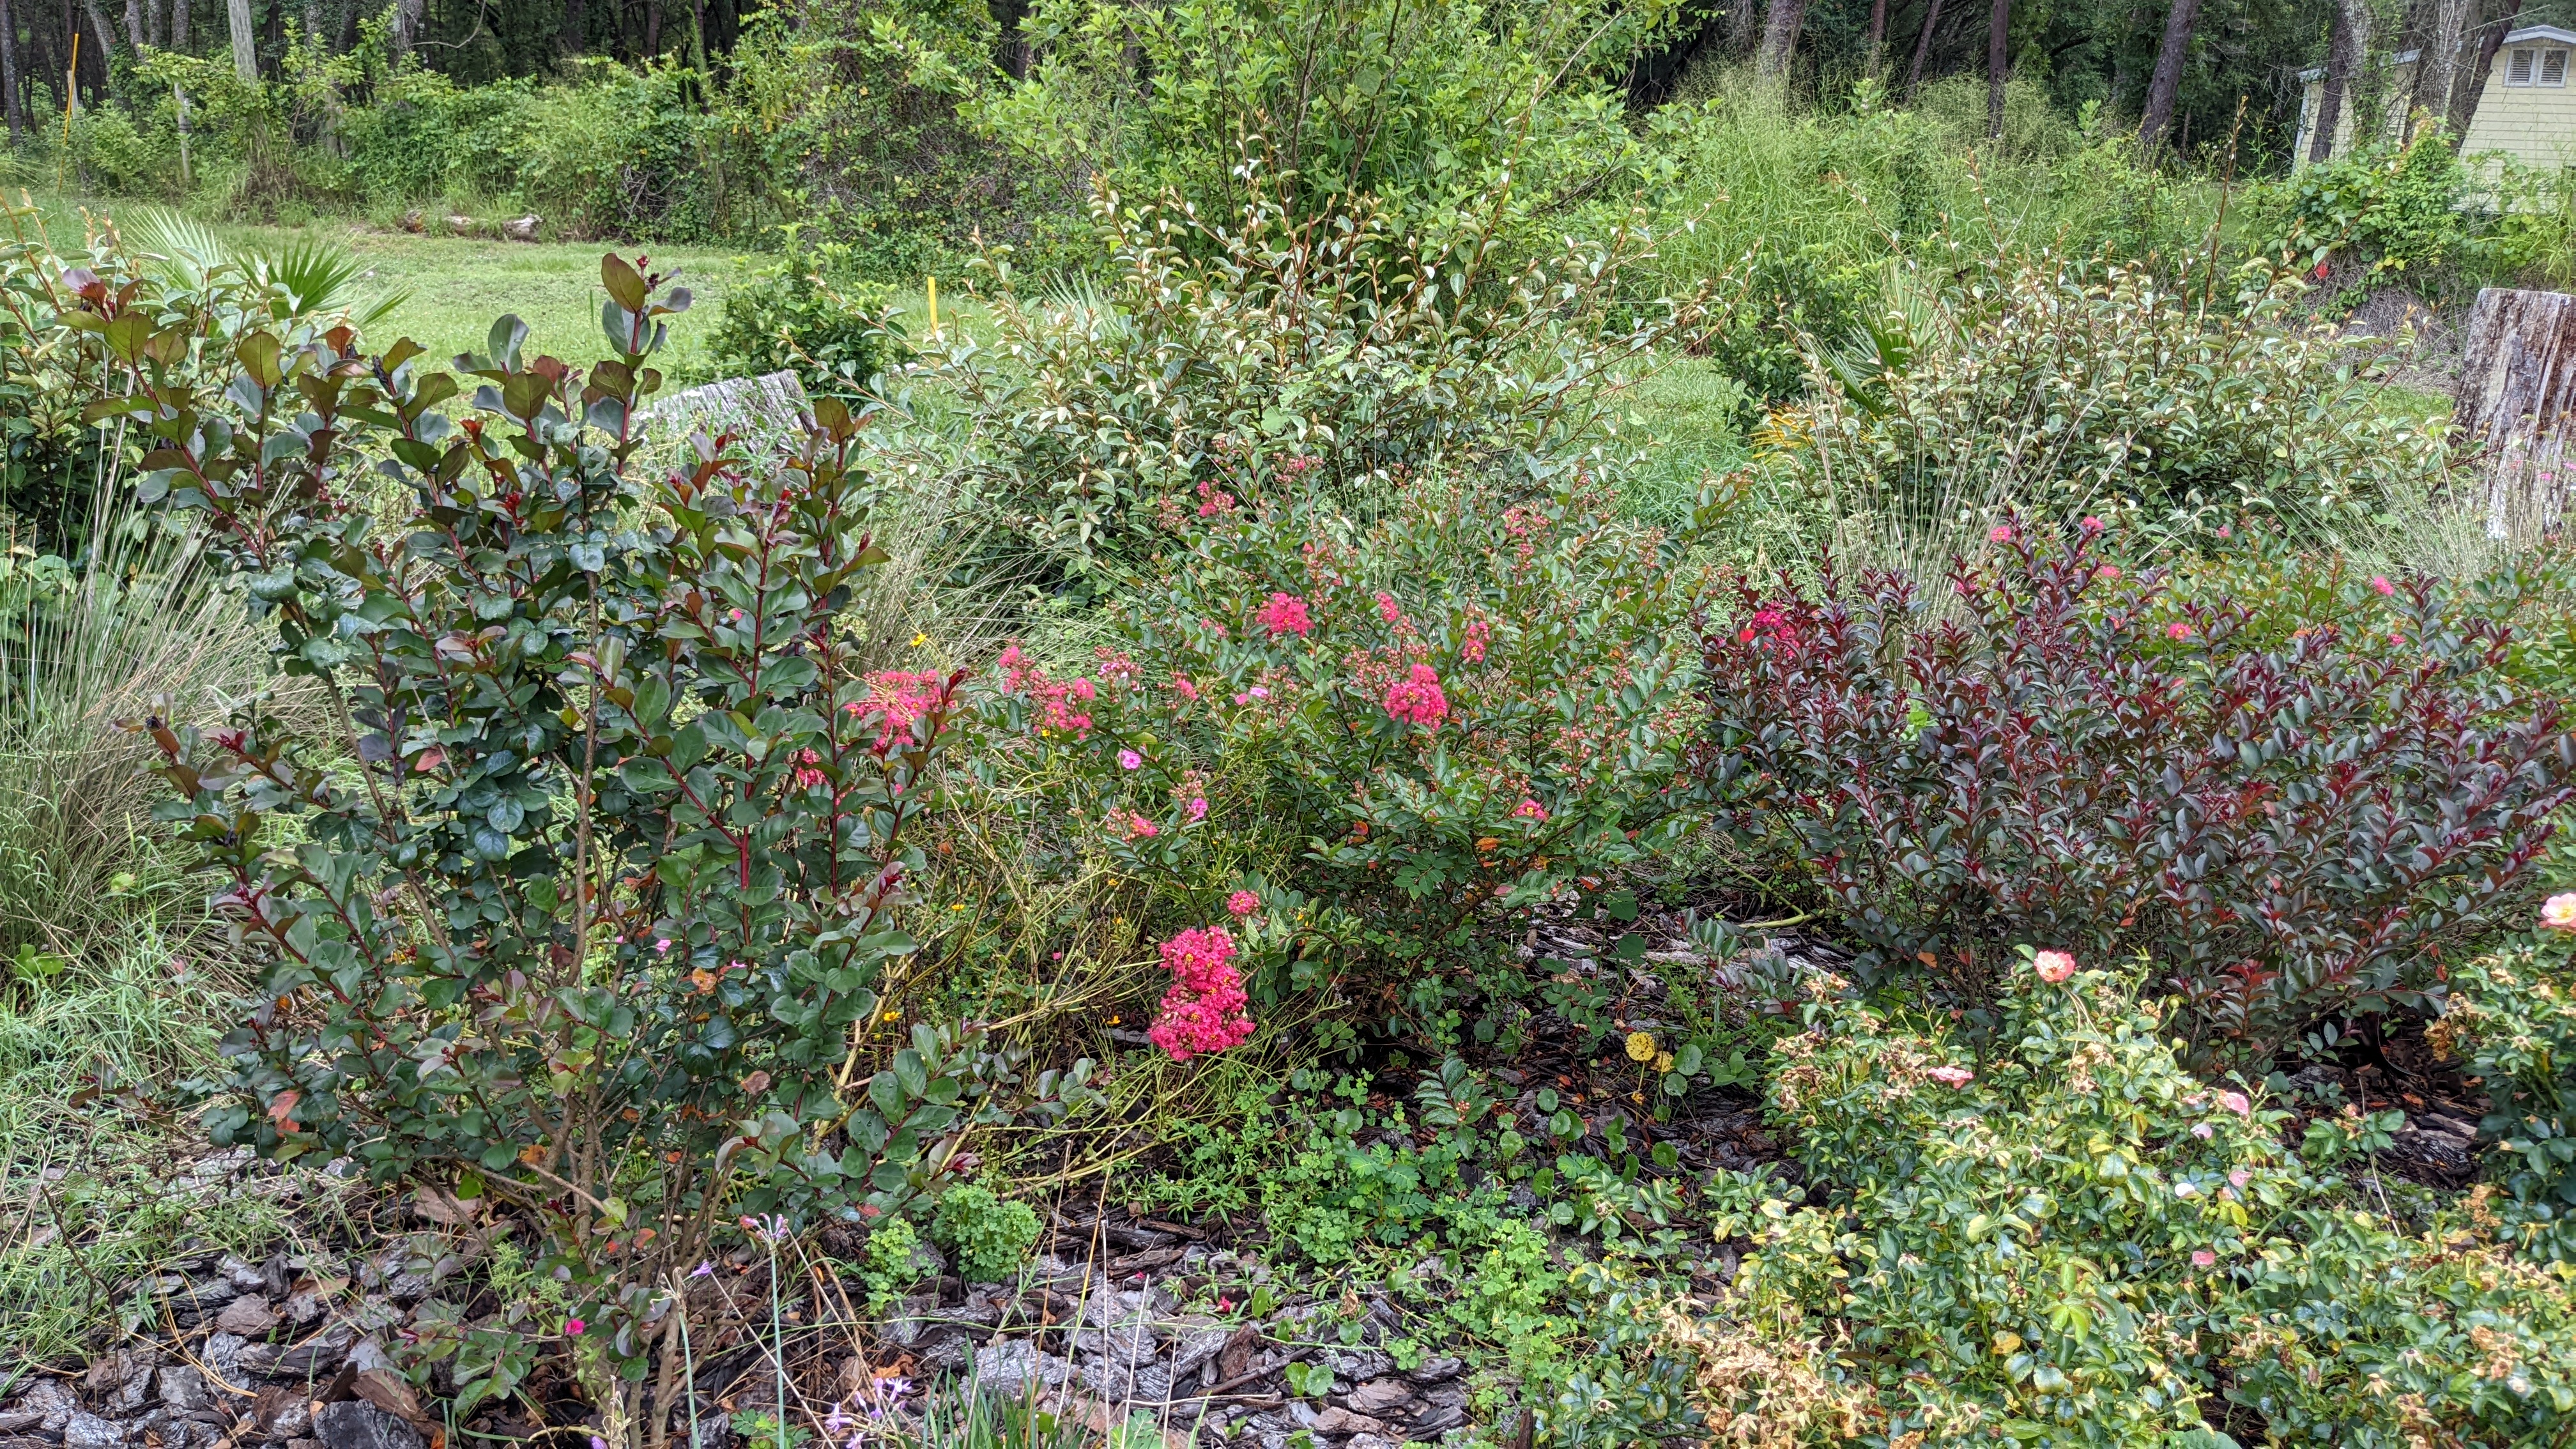 three two-foot crepe myrtle shrubs with raspberry flowers and a taller tree variety that is still juvenile